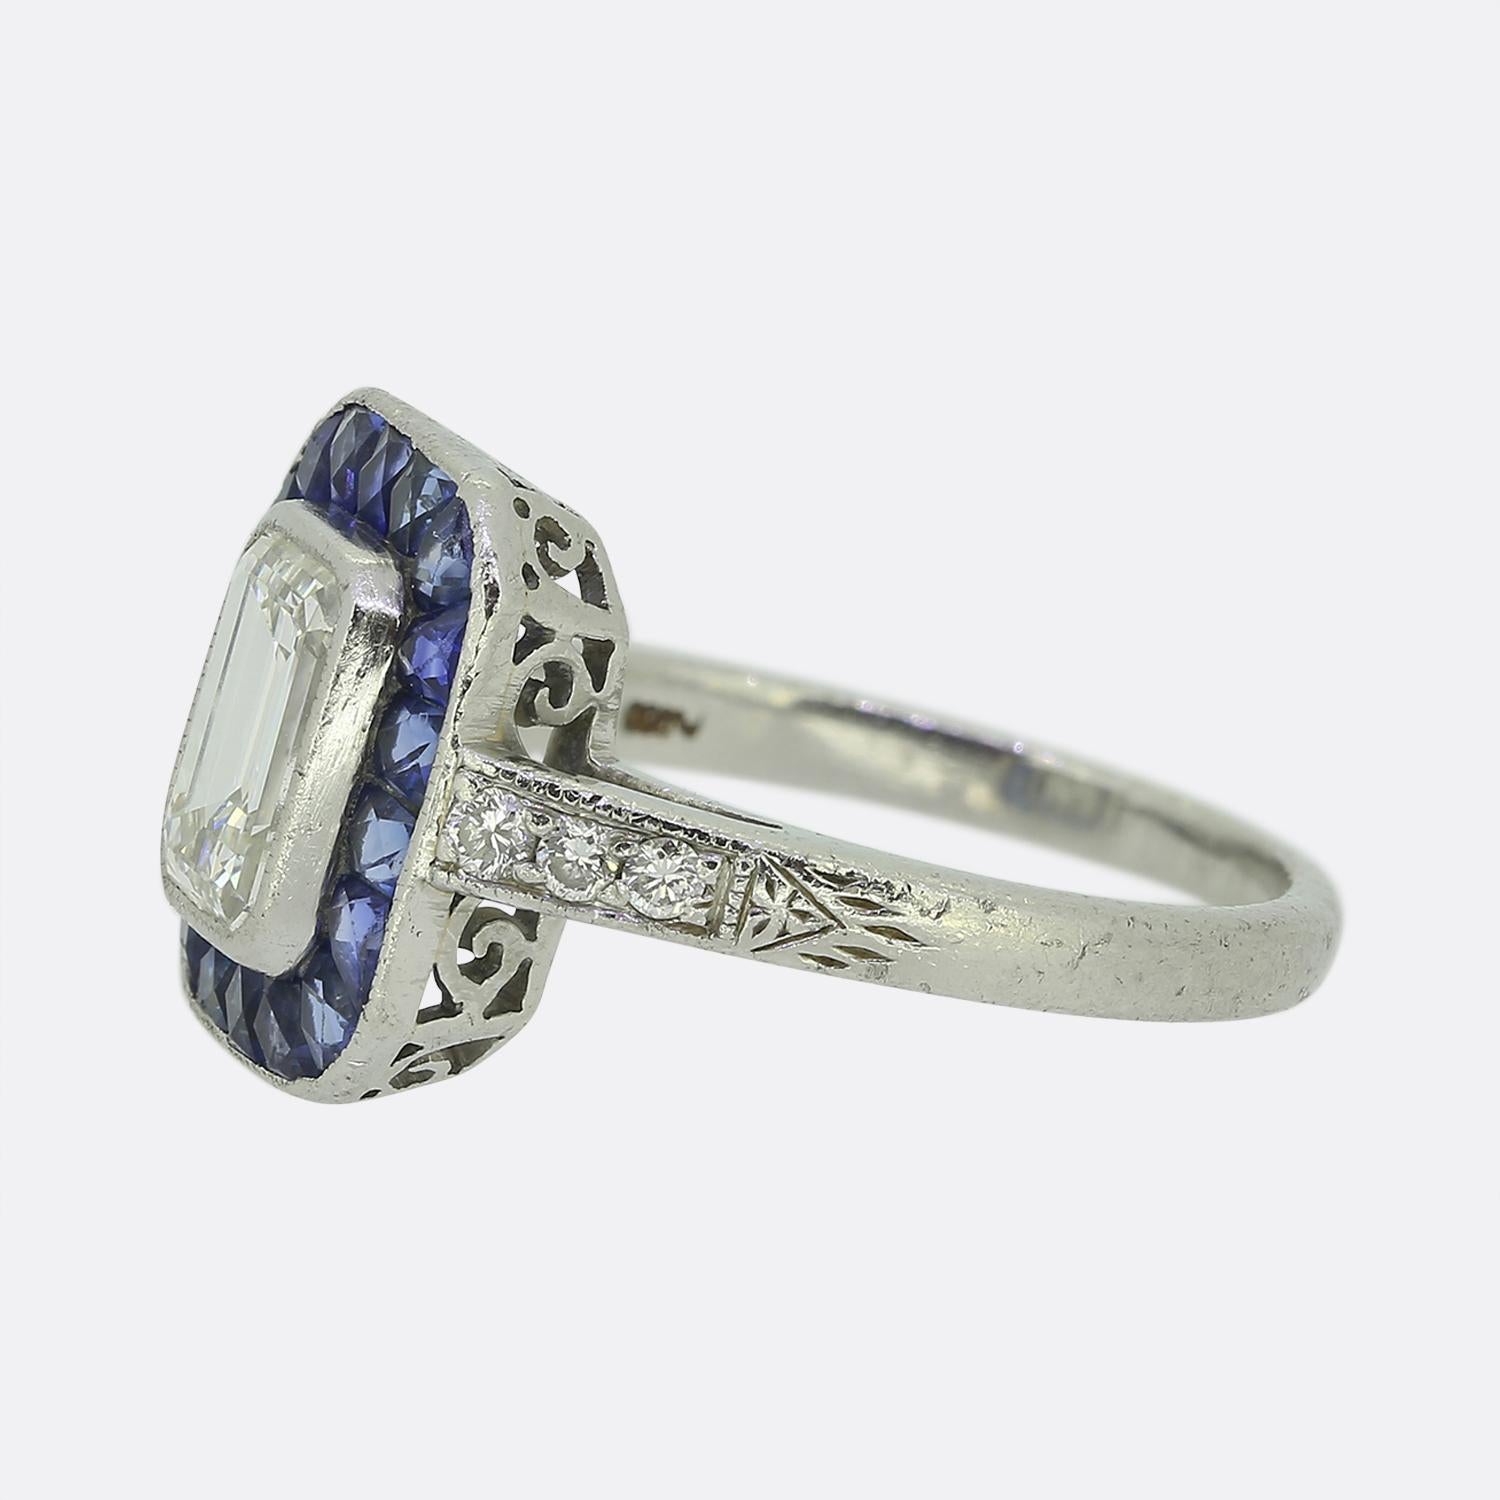 Here we have an outstanding platinum cluster ring crafted at a time when the Art Deco style was continuing to revolutionise the world of design. A remarkably clean, bright white emerald cut diamond sits slightly risen at the centre of the face. This